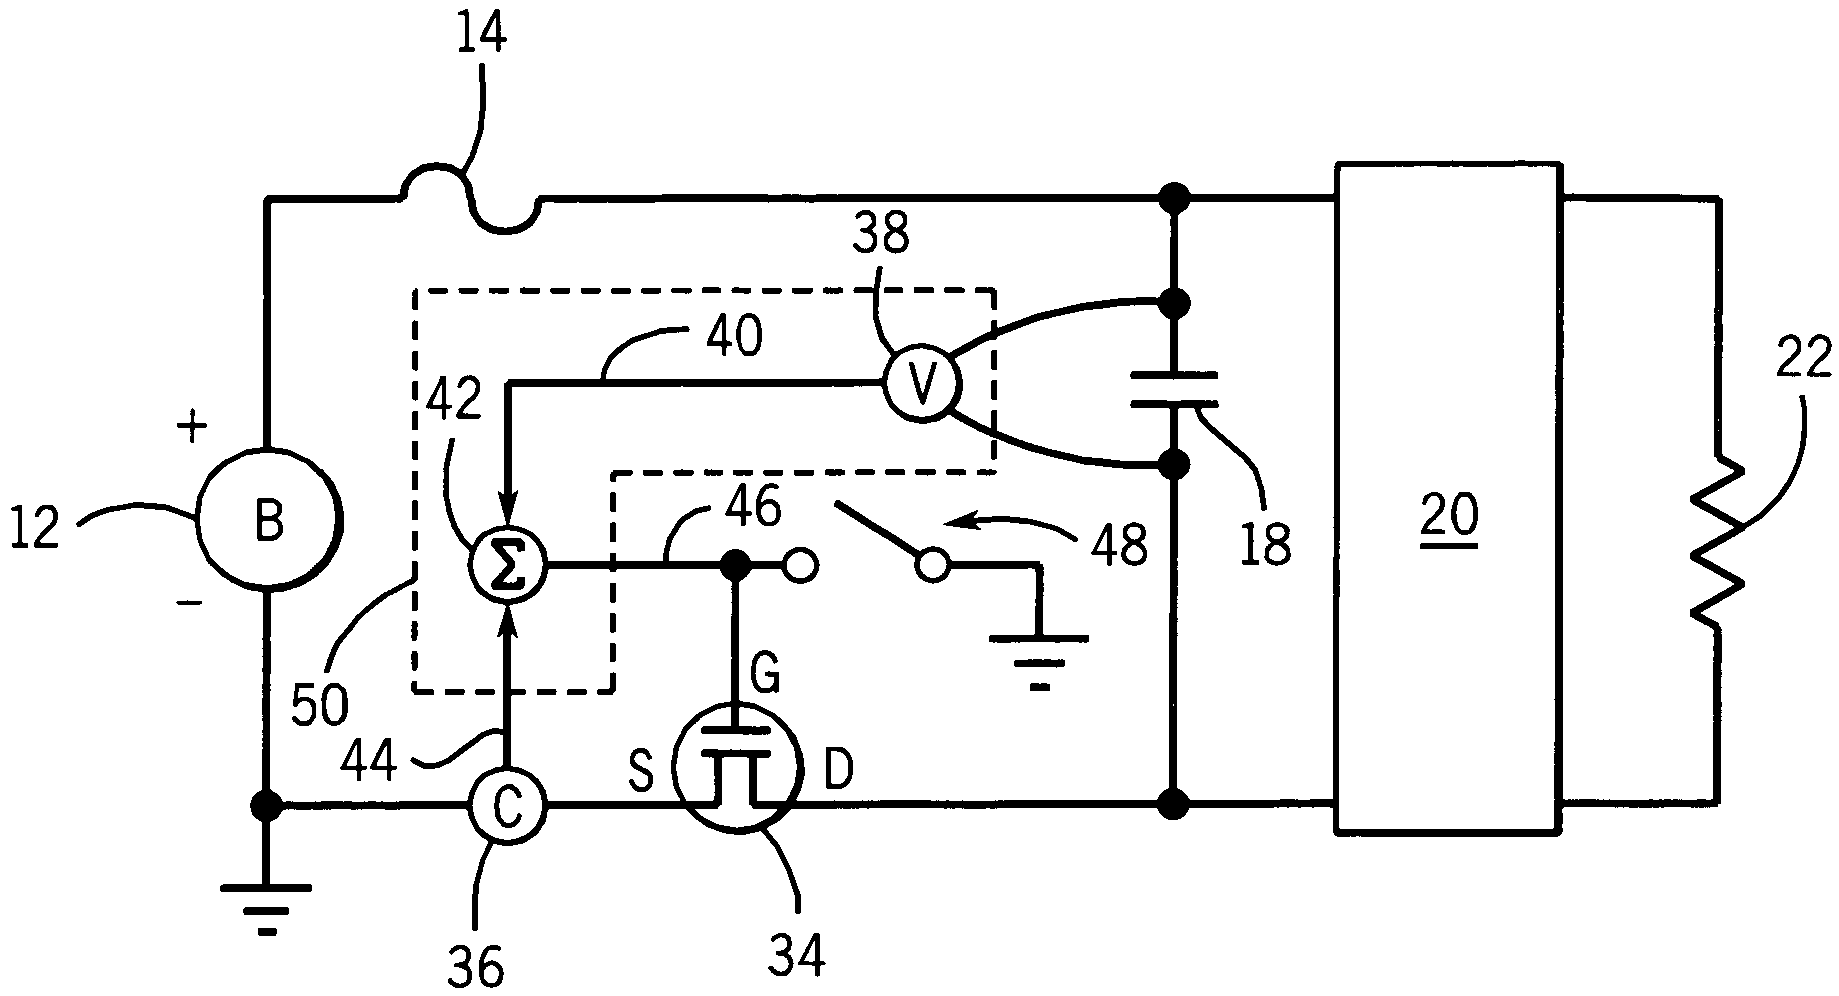 Controlled inrush current limiter